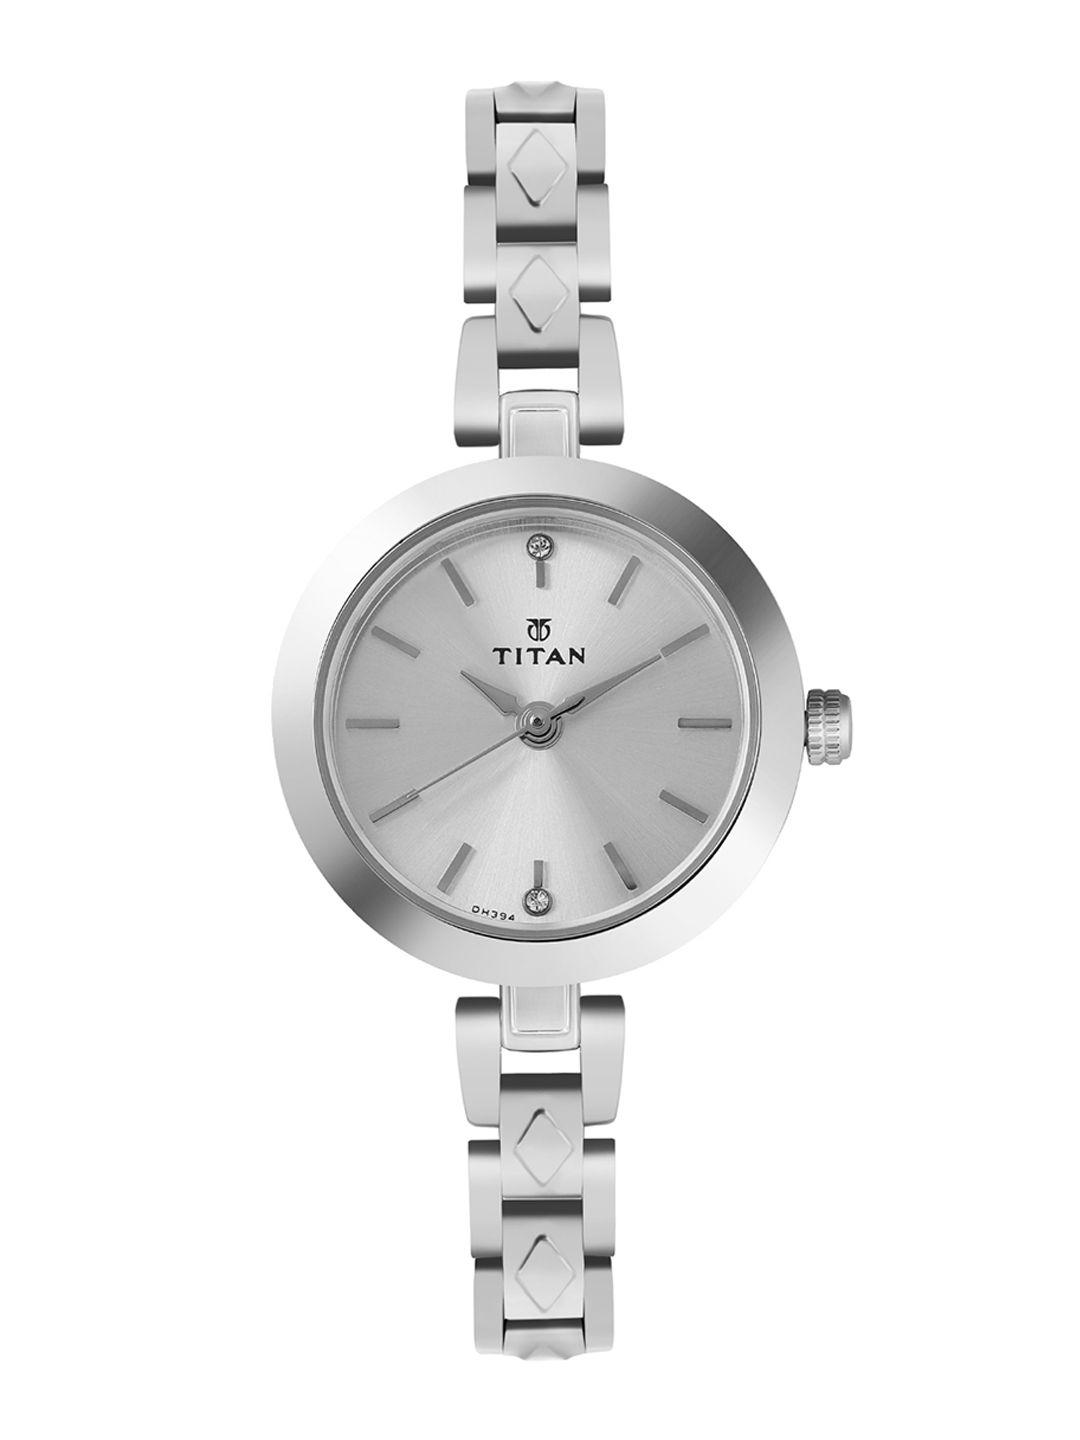 Titan Women Silver-Toned Analogue Watch 2598SM01 Price in India